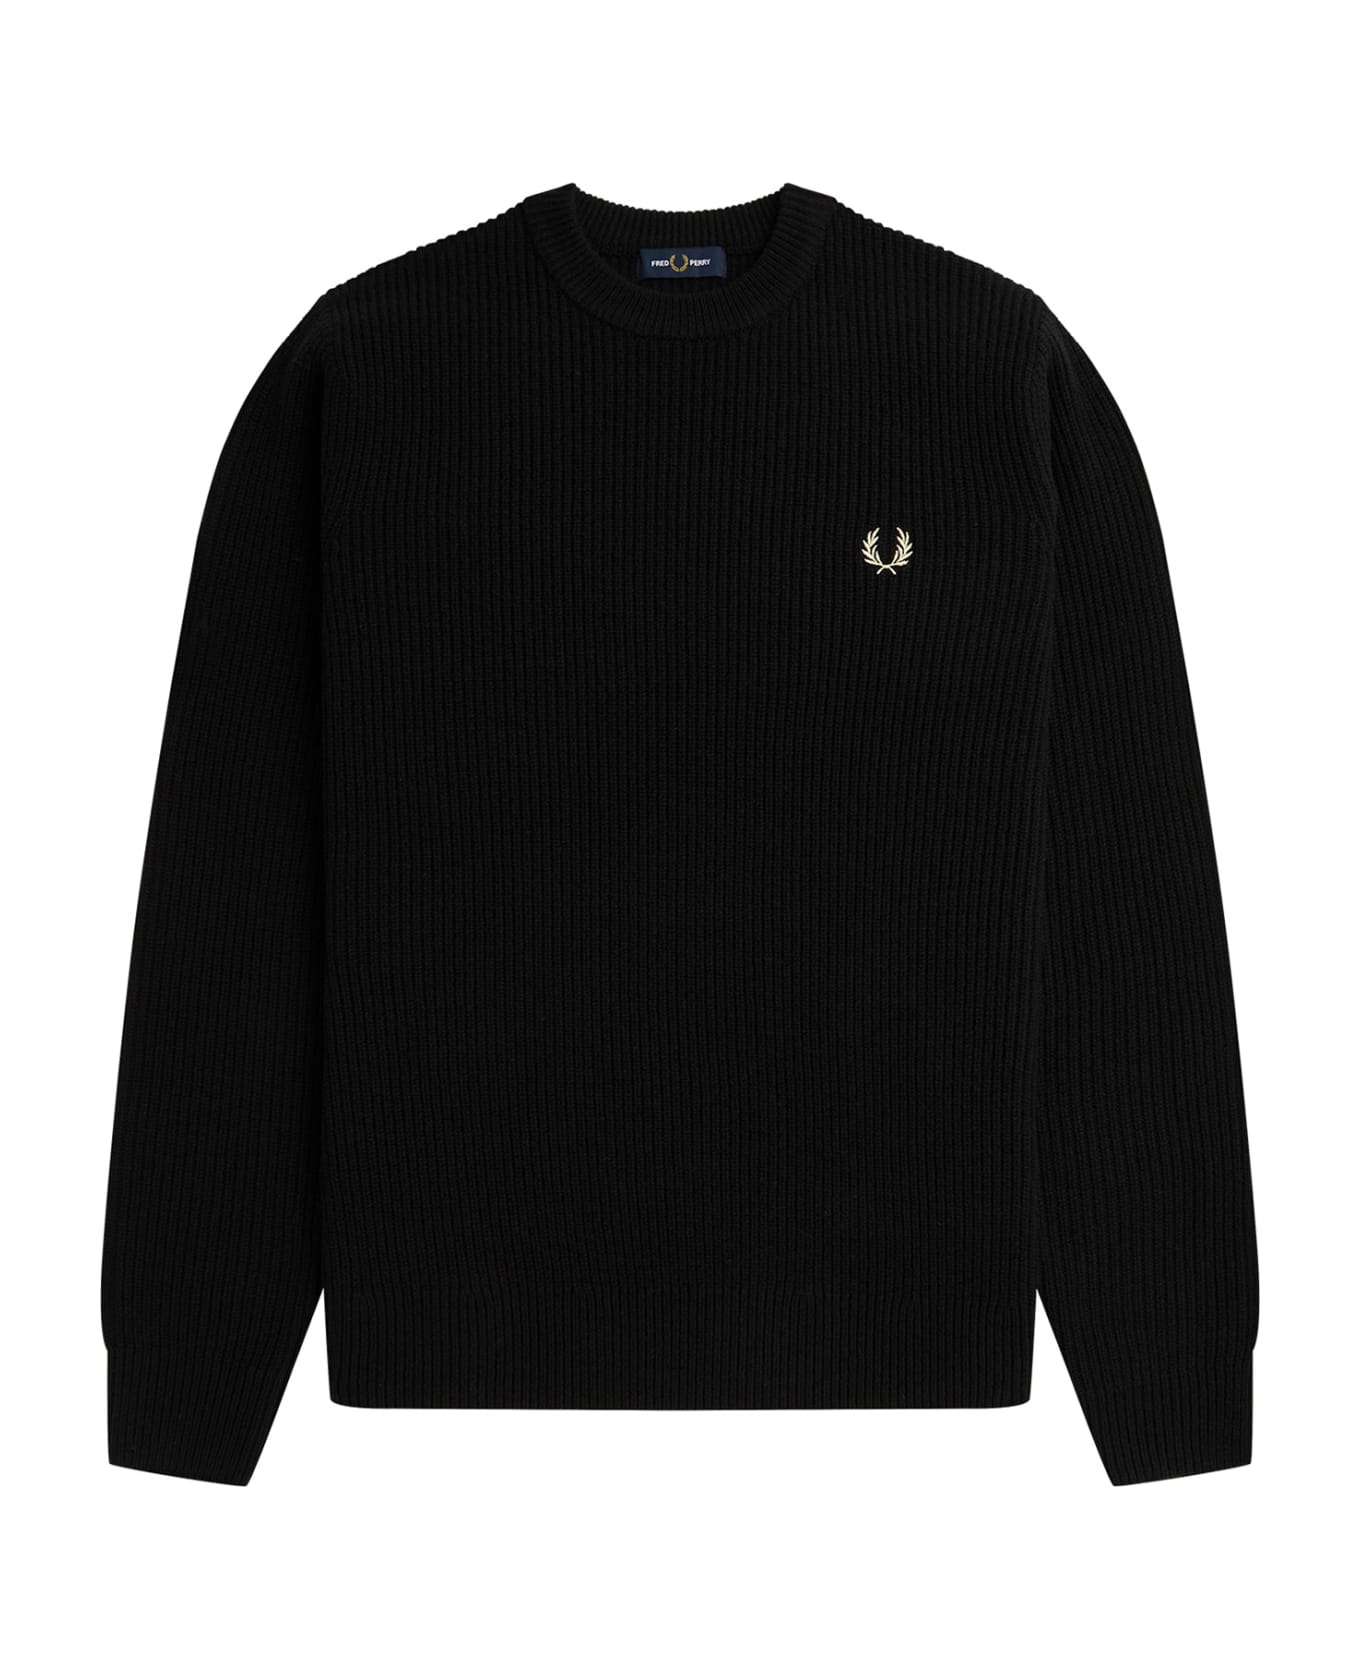 Fred Perry Sweater - Black